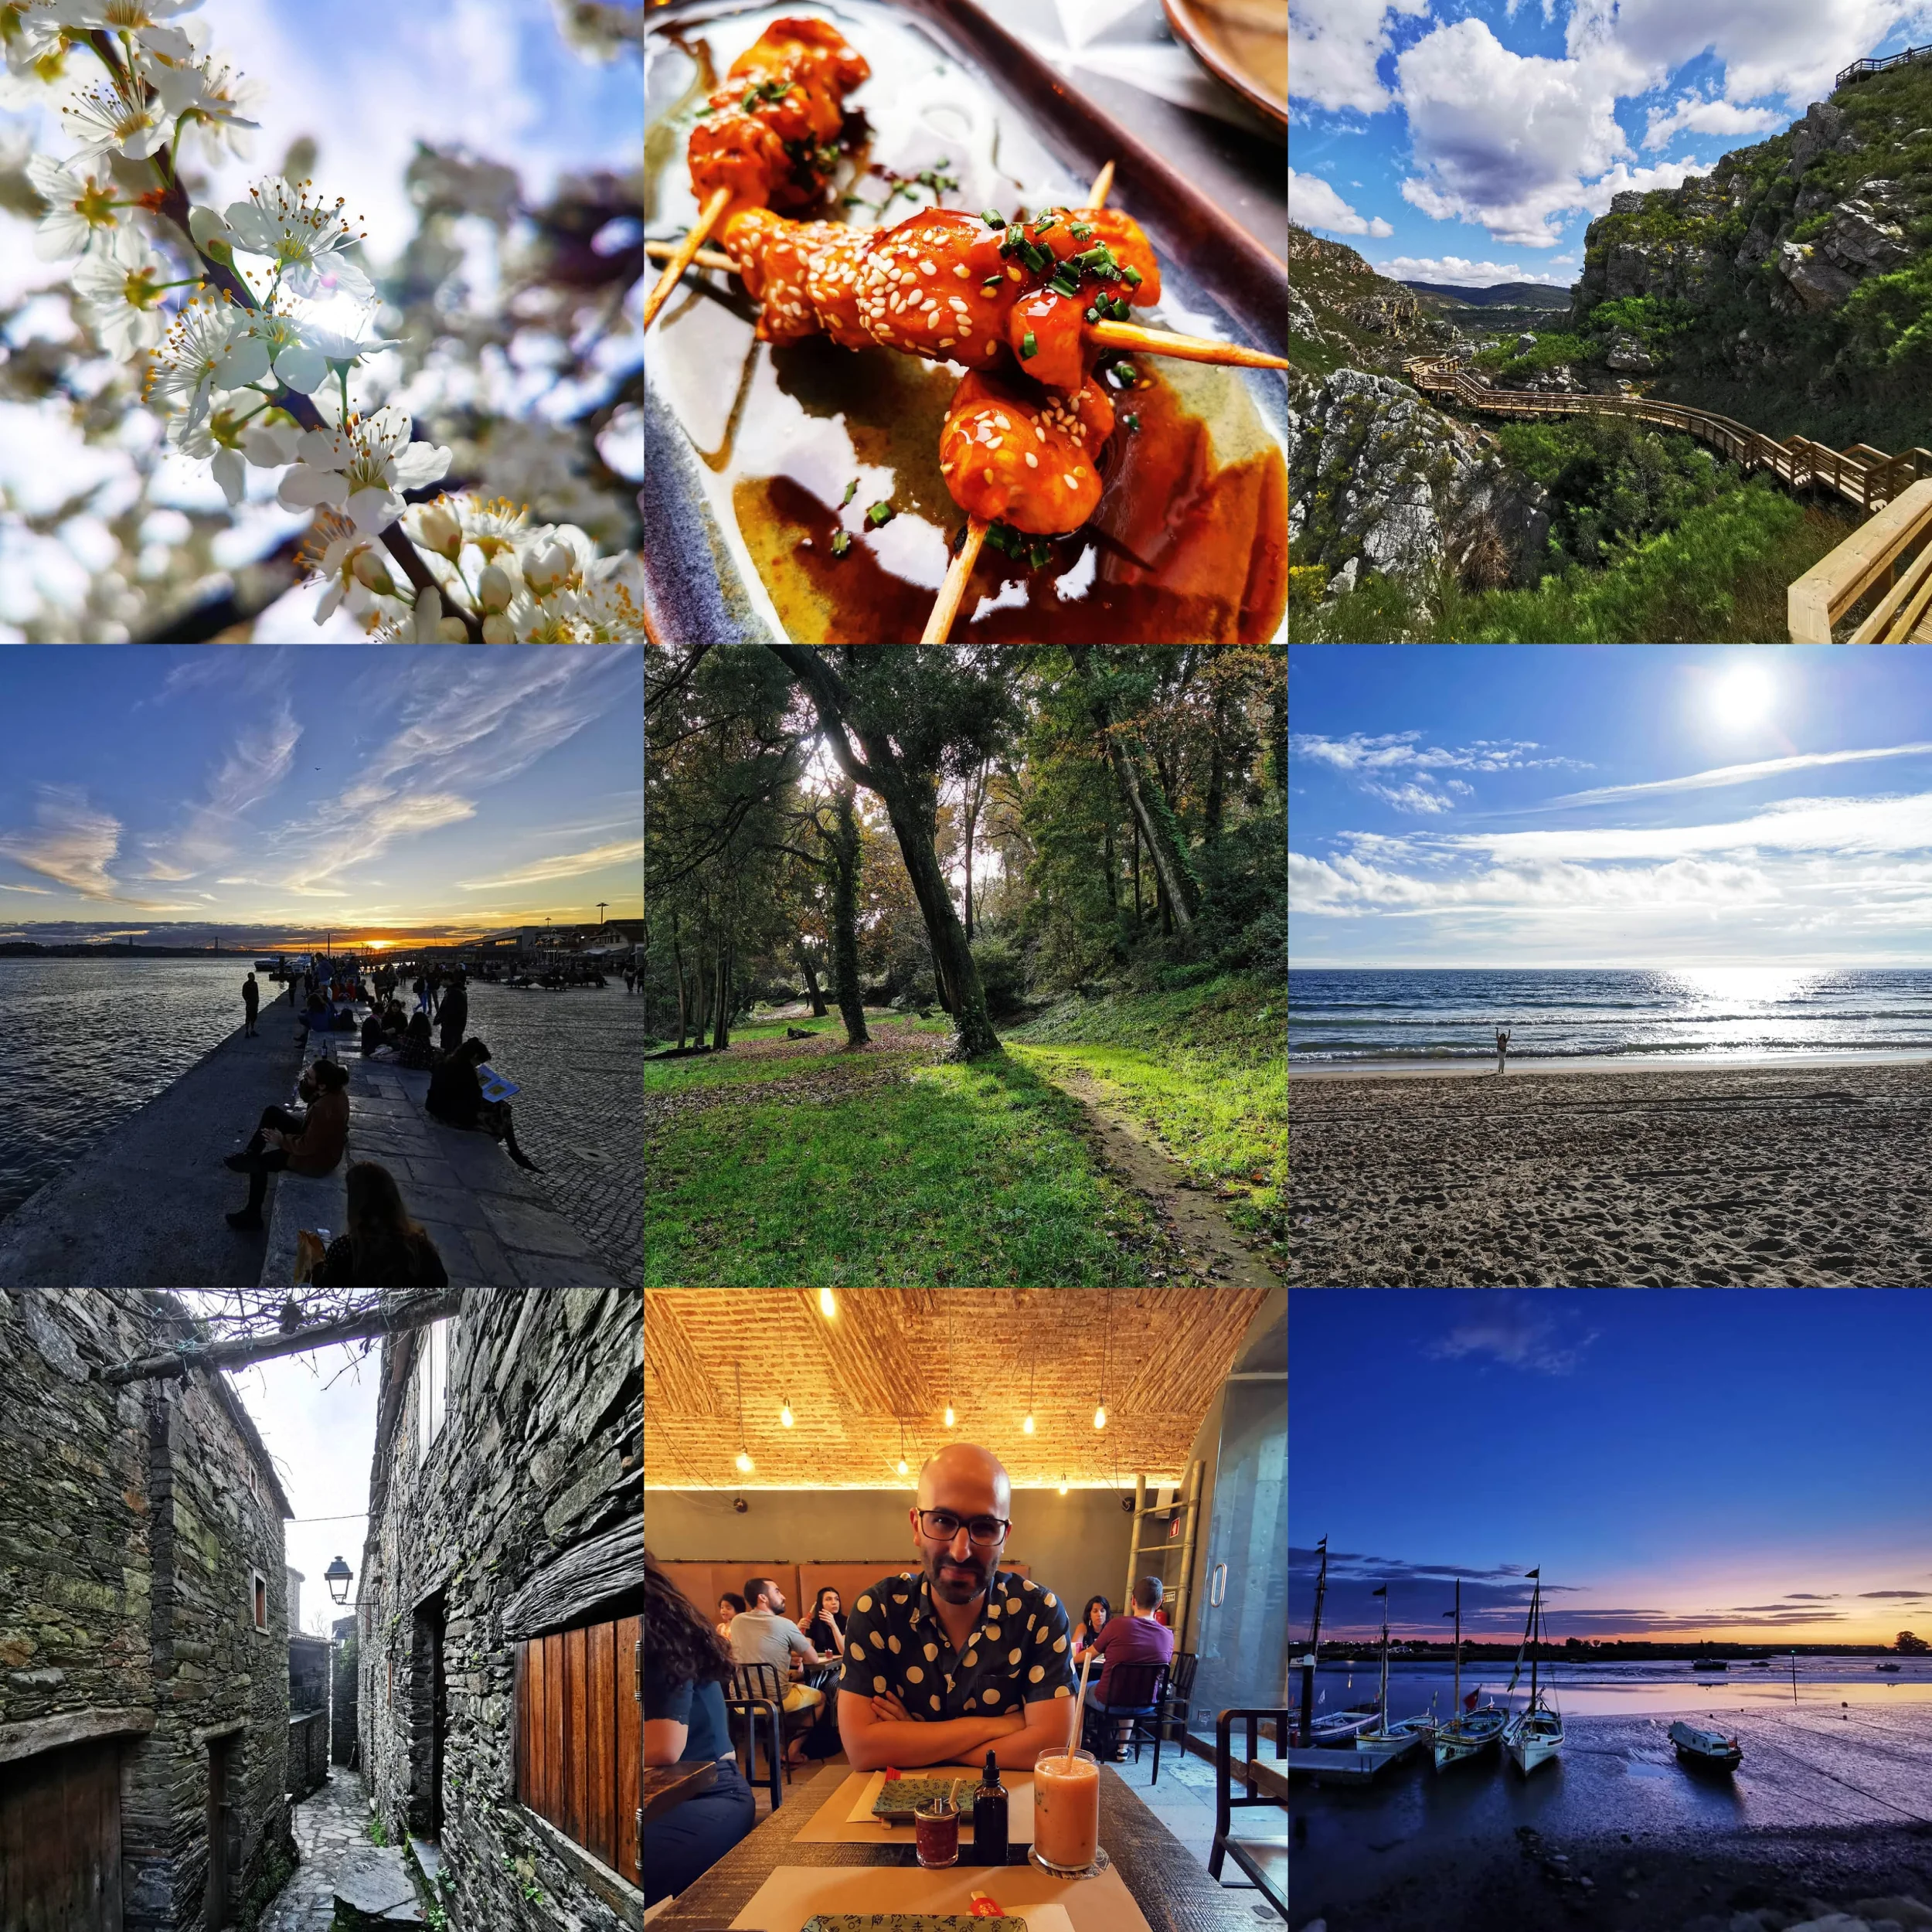 Mosaic of 9 photographs with varied subjects but mostly related to travel, food, and nature.